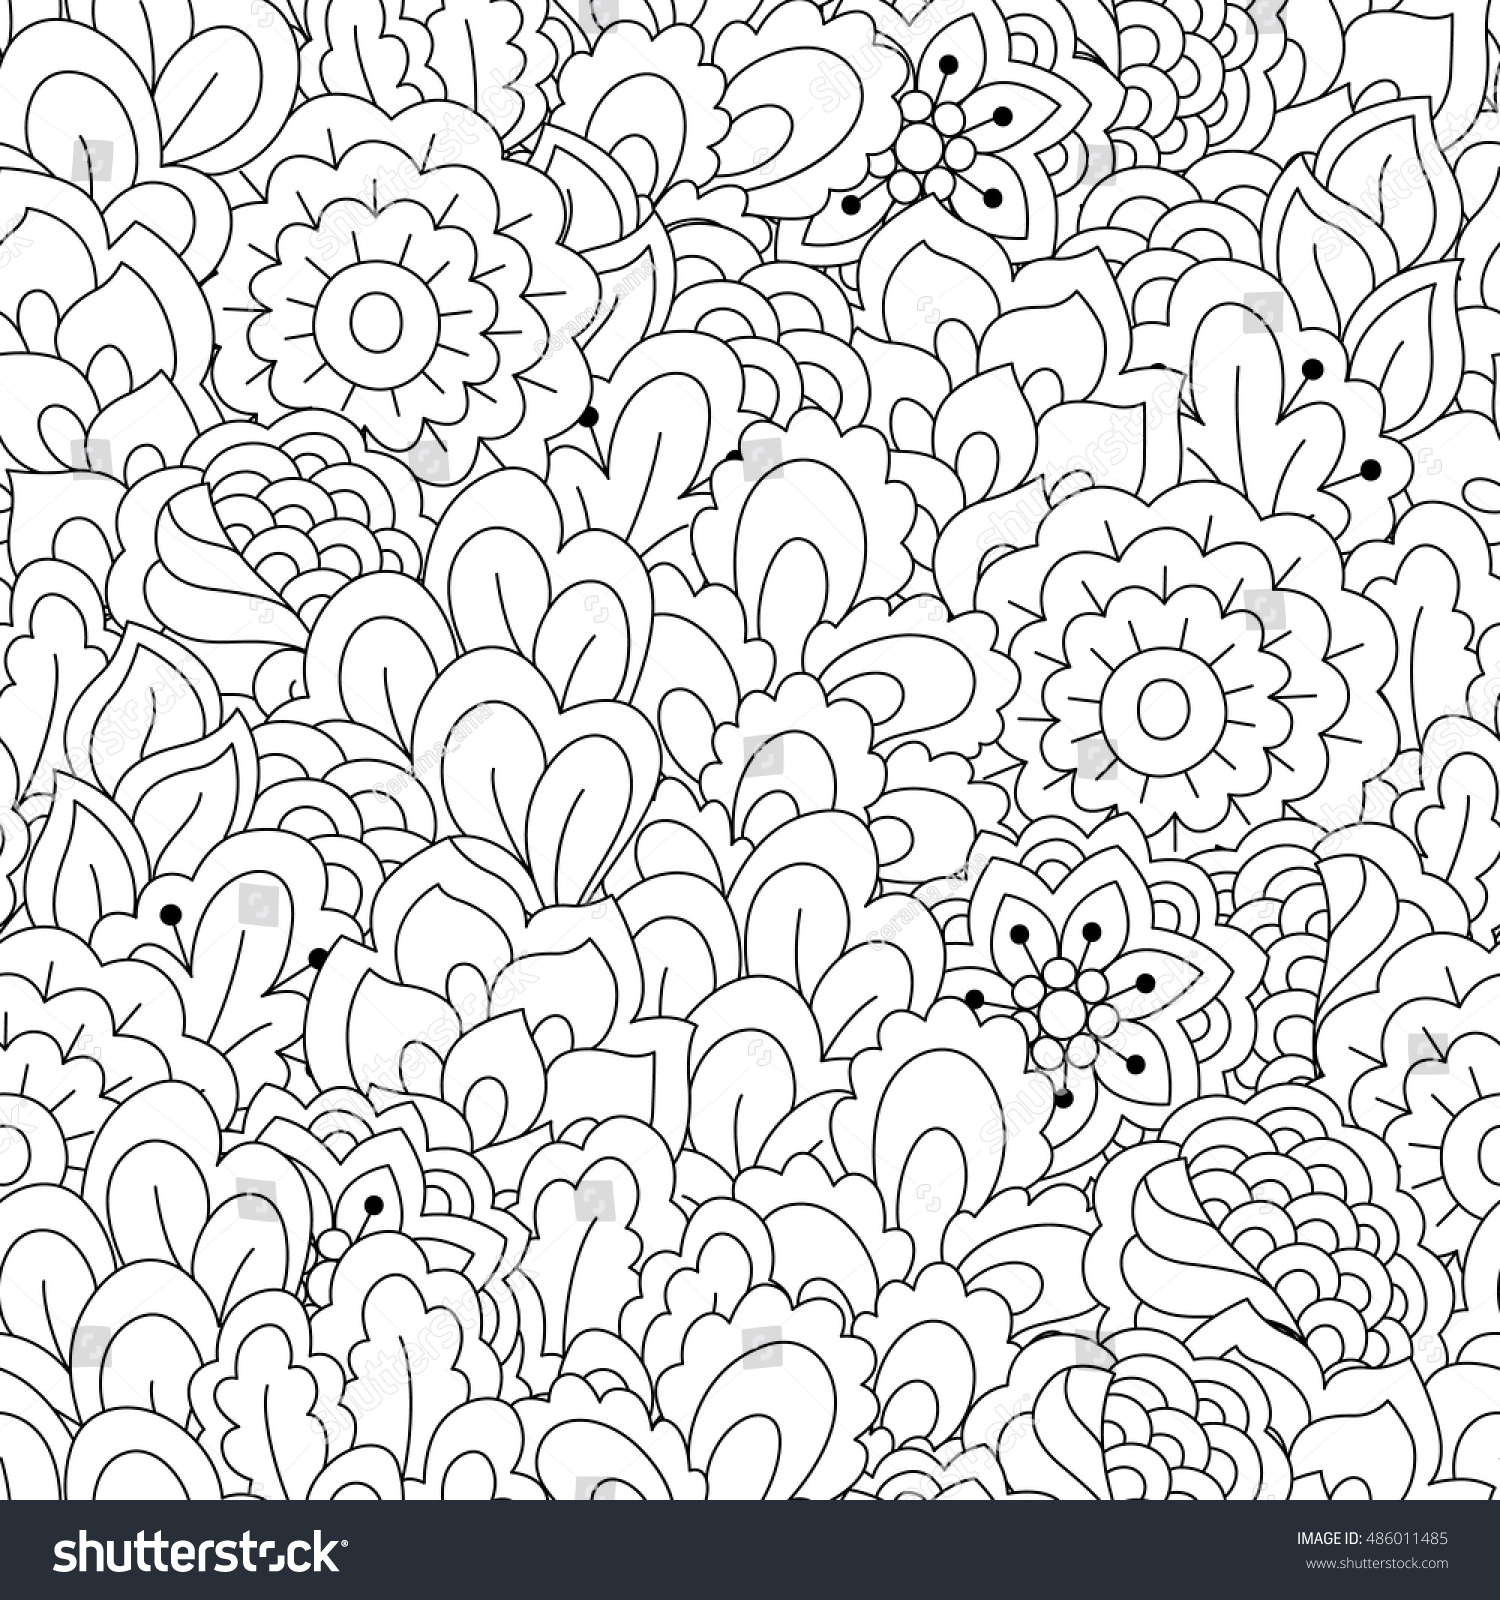 Seamless Black White Background Floral Ethnic Stock Vector (Royalty ...